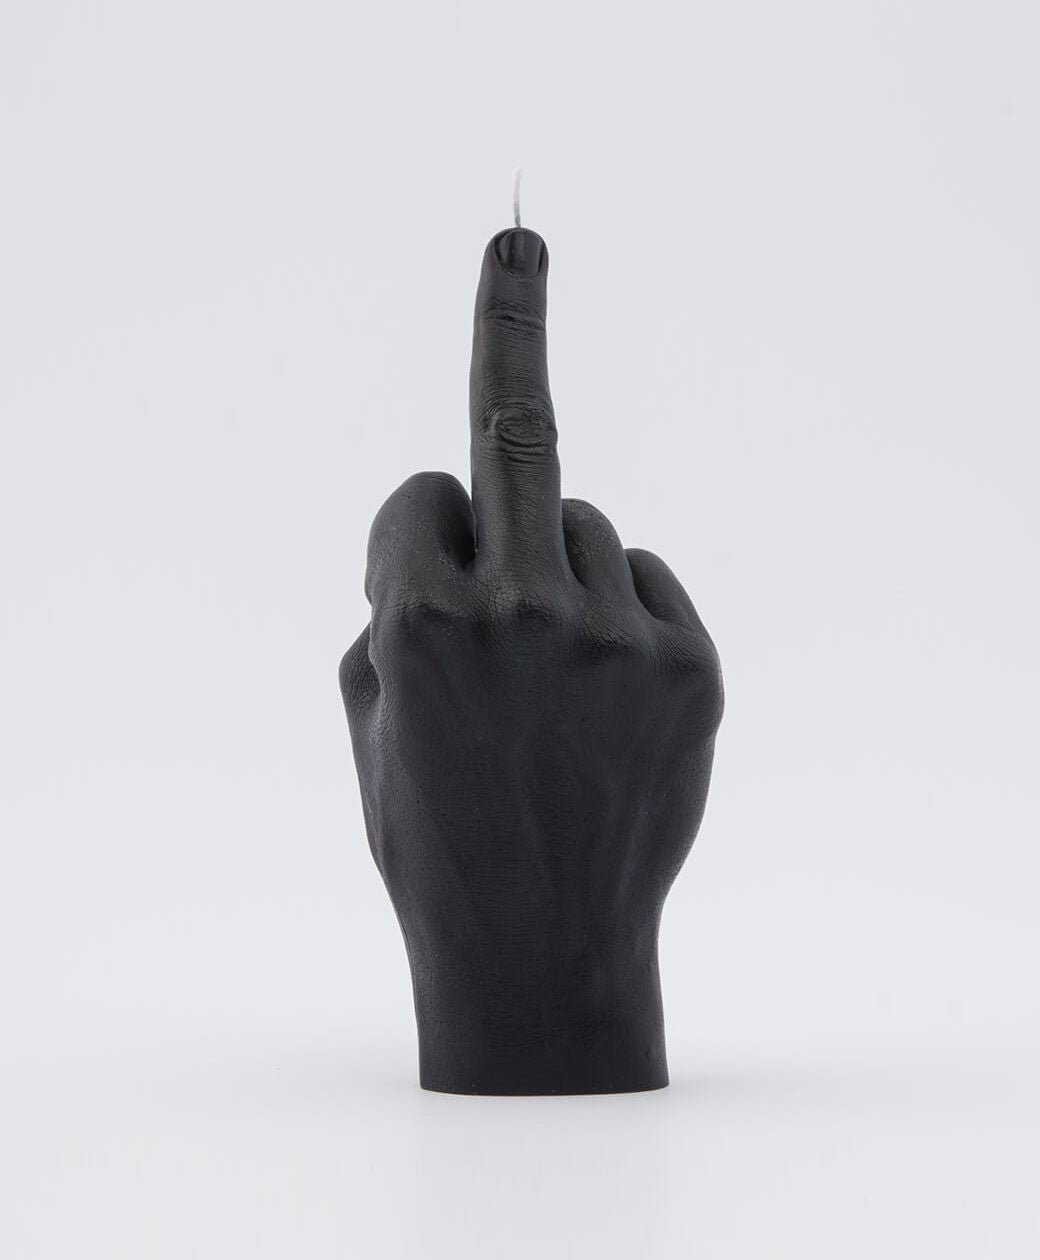 Hand Gesture Candle F*ck You Black